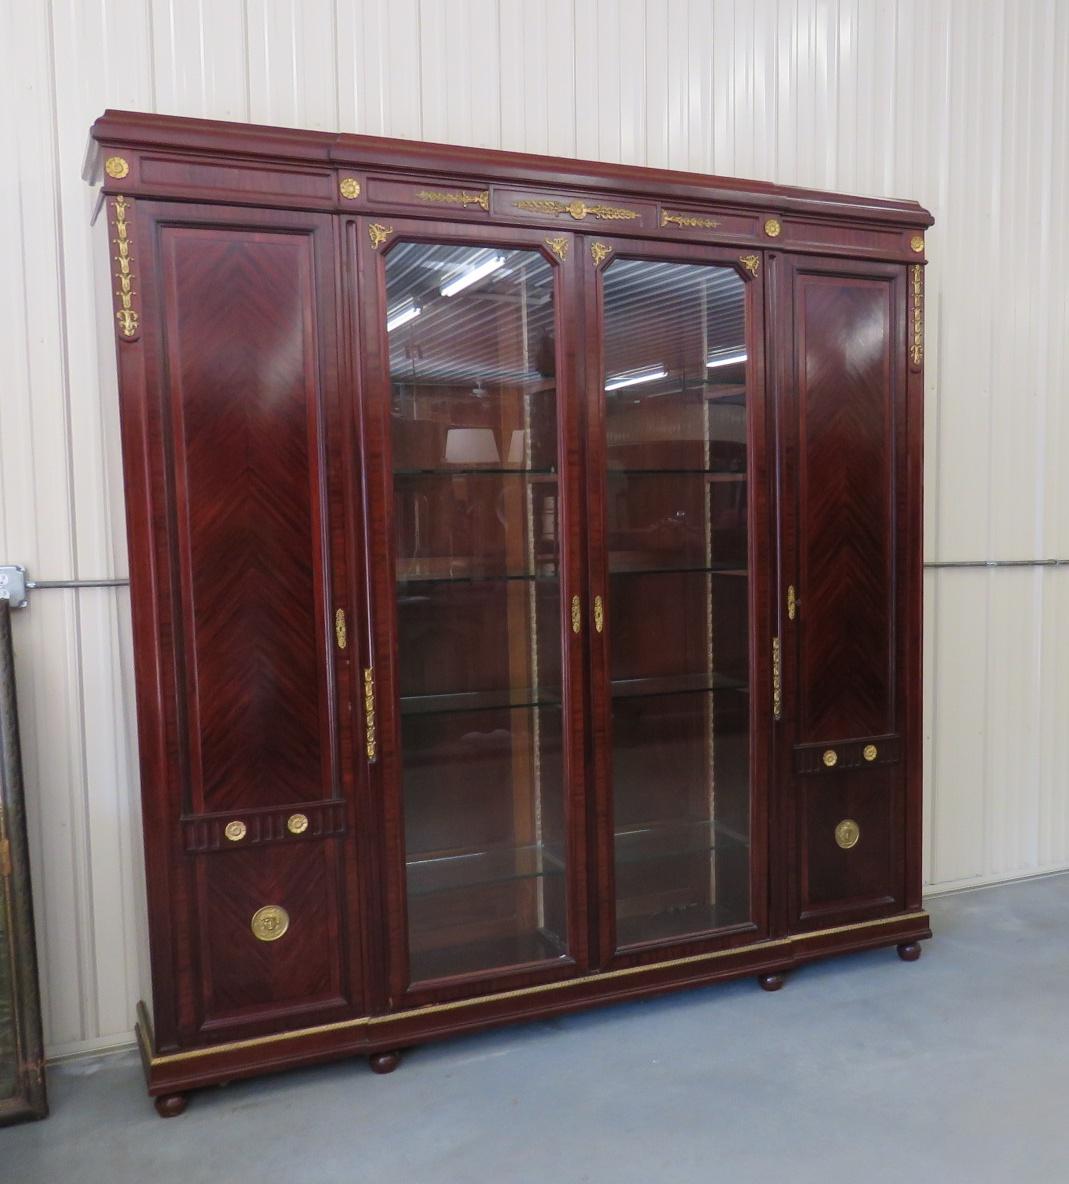 Regency style brass mounted 4-door breakfront. Centre glass doors each contain 5 glass shelves. The doors on each side have 5 shelves.